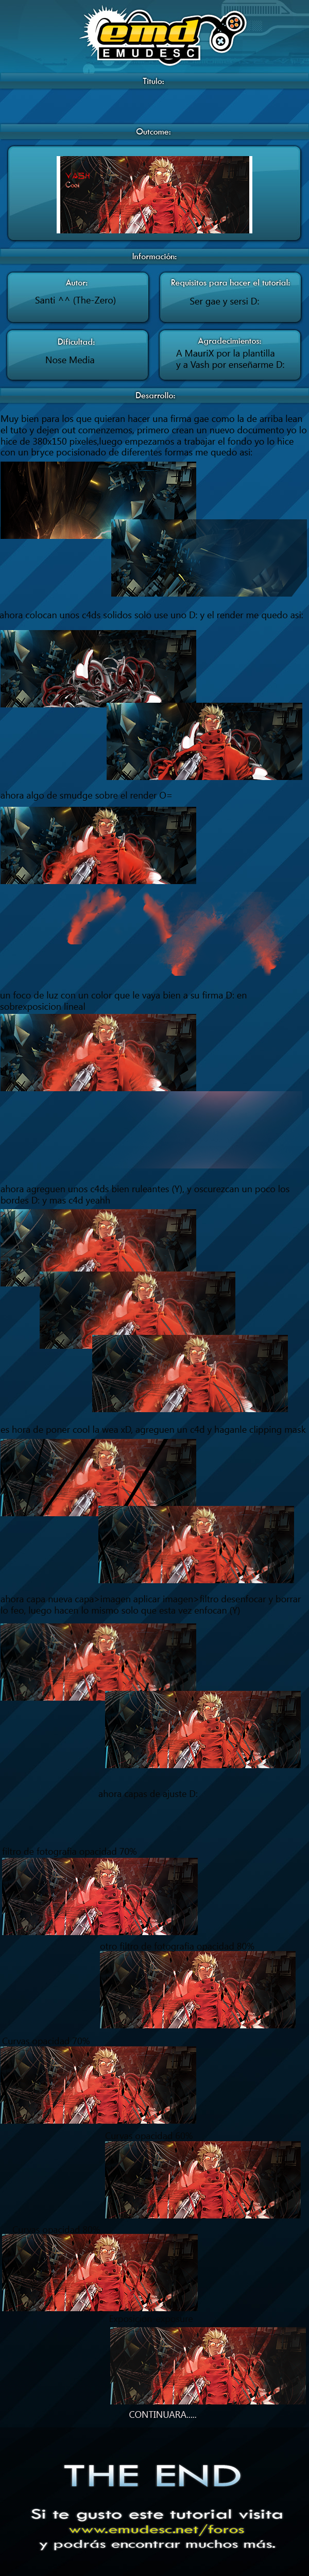 Vash_is_Cool_Tutorial_by_Zerox95.png